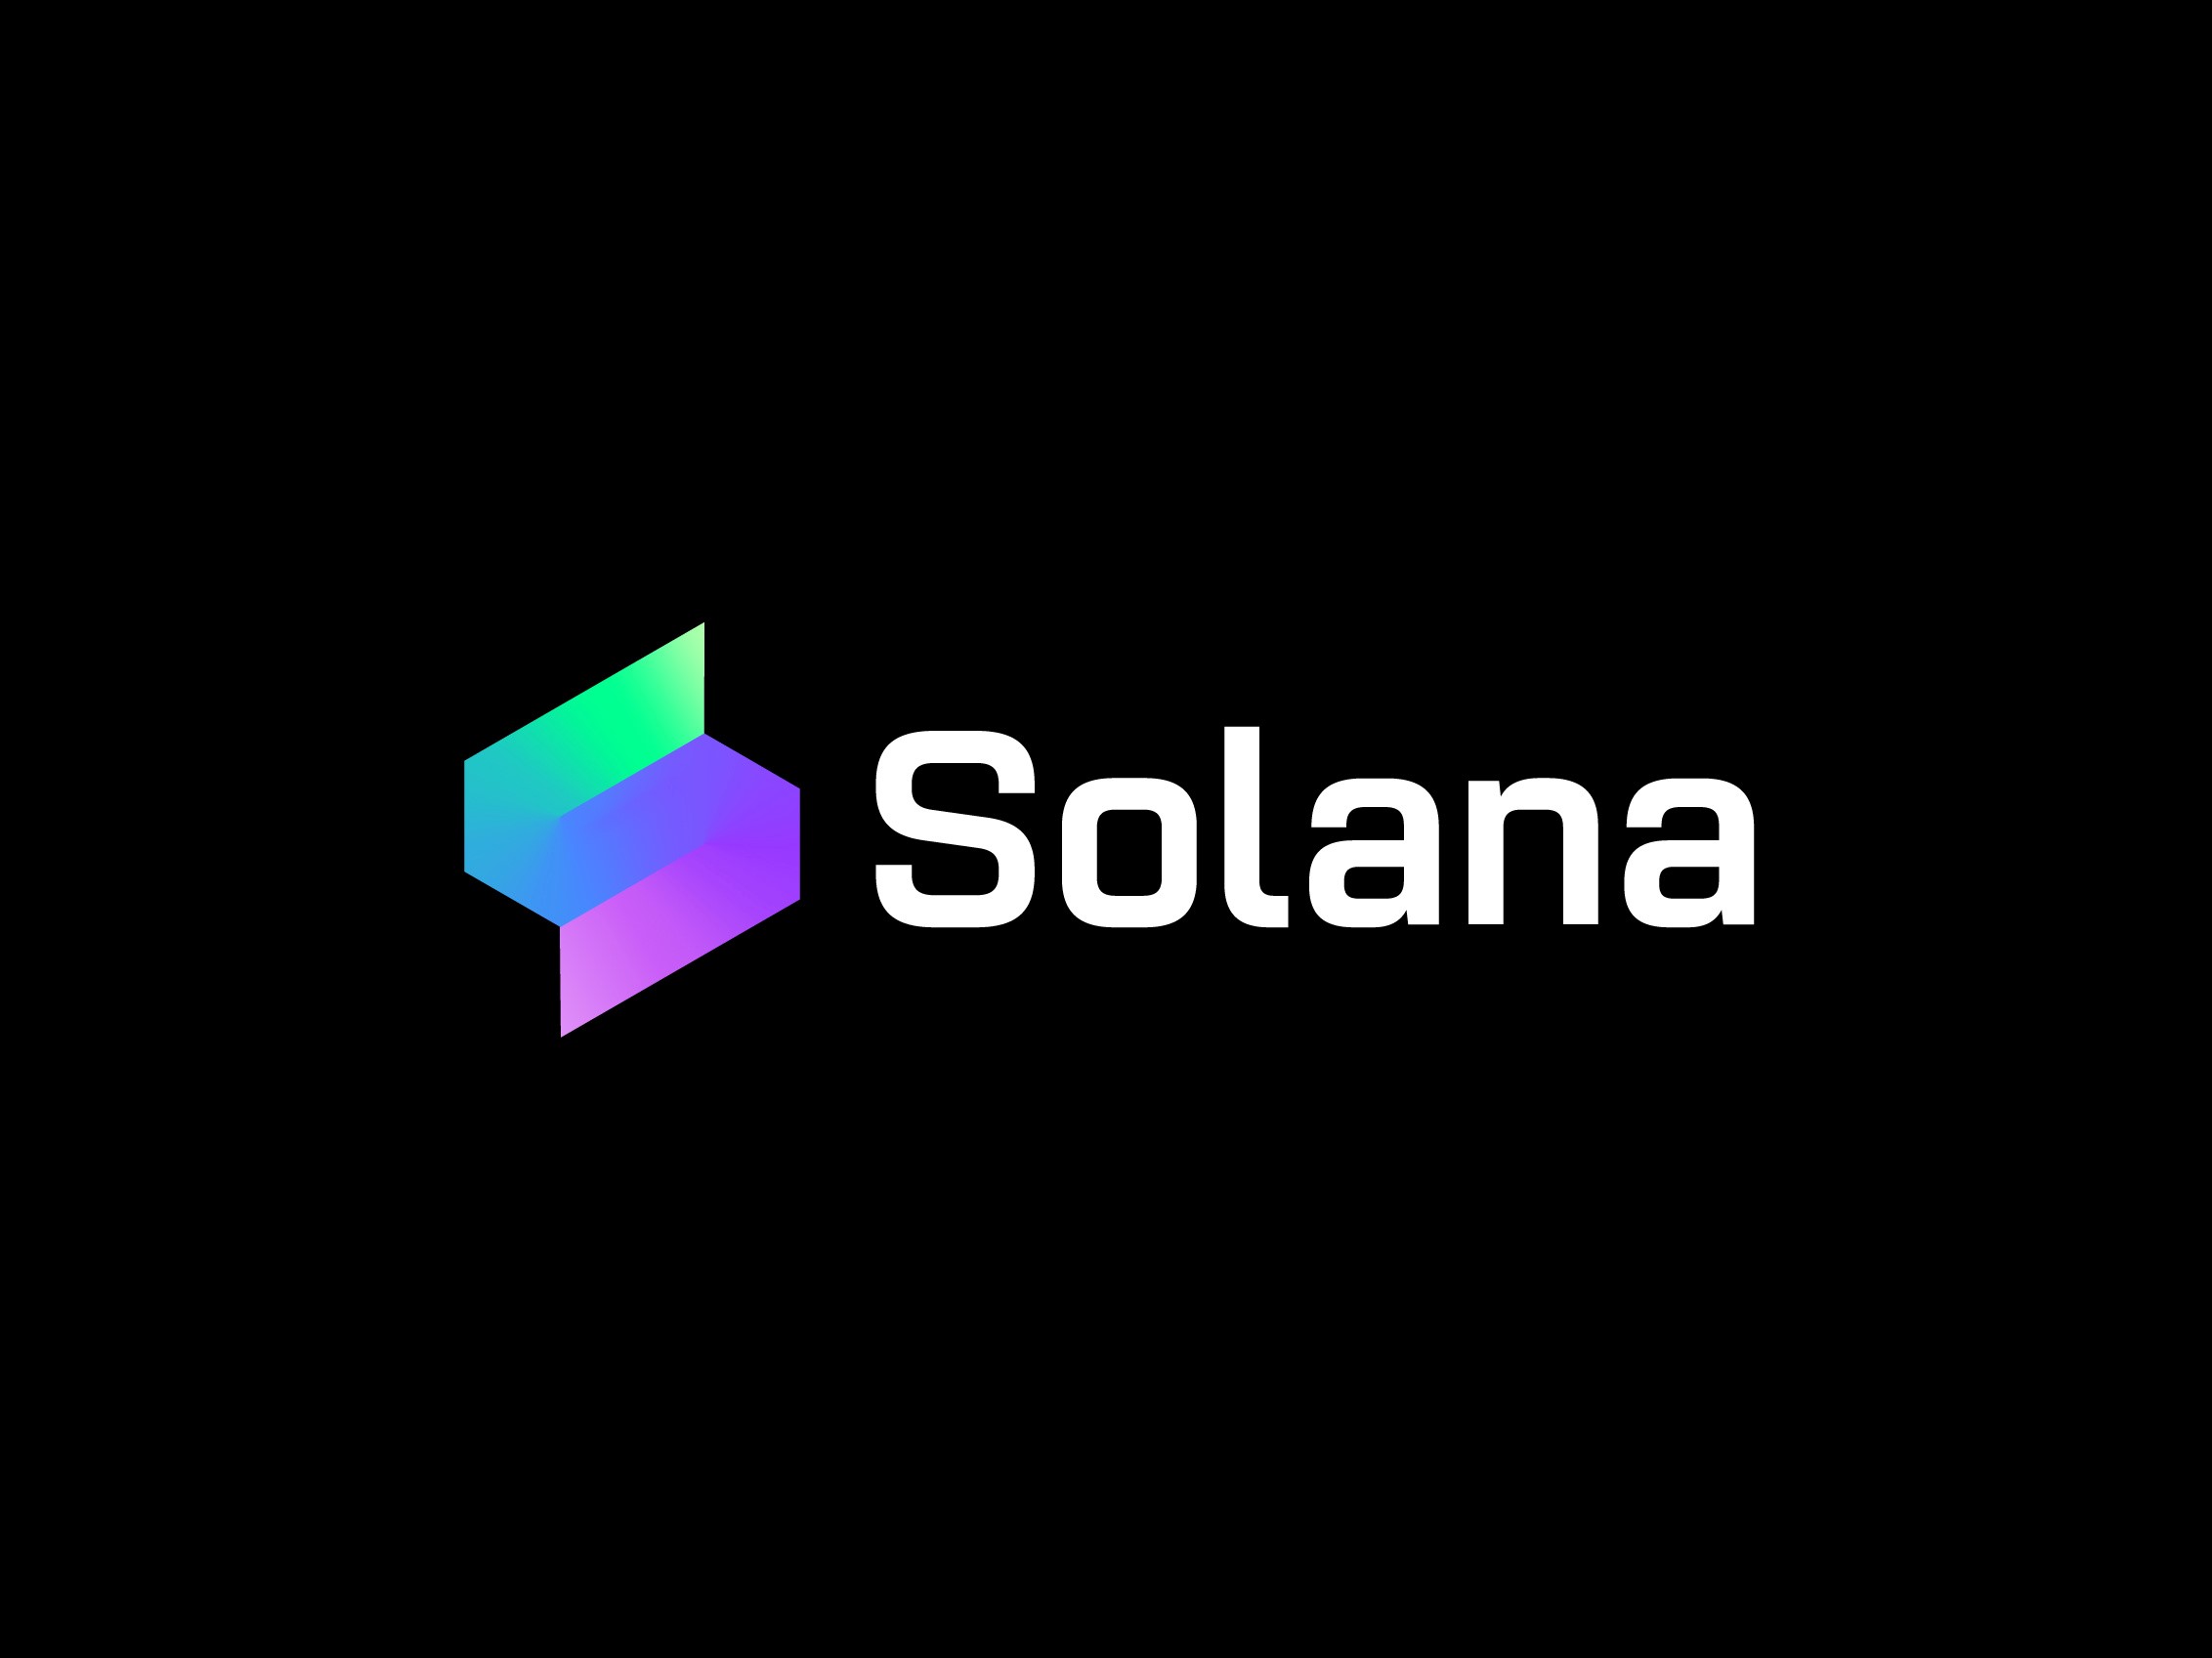 Solana (SOL) is a highly functional open source project that banks on blockchain technology’s permissionless nature to provide Decentralized Finance (DeFi) solutions. While the idea and initial work on the project began in 2017, Solana was officially launched in March 2020 by the Solana Foundation with headquarters in Geneva, Switzerland, headed by Anatoly Yakovenko.